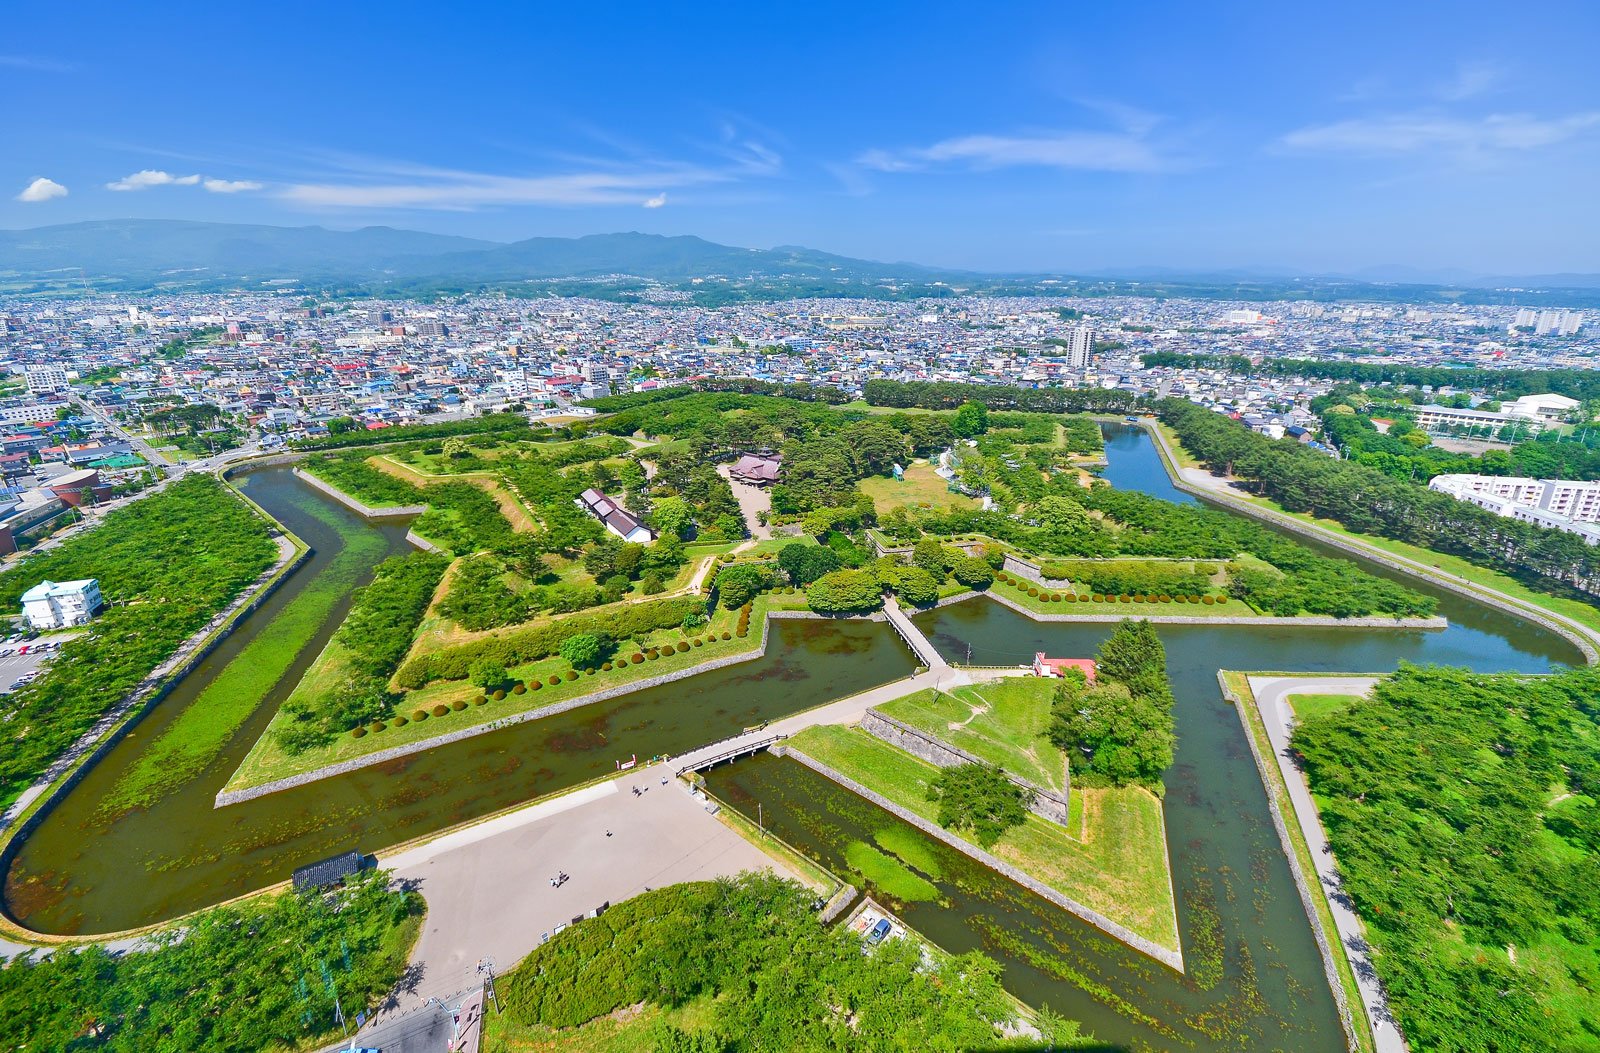 Hakodate's iconic star-shaped fort, evidence of the impact of the West